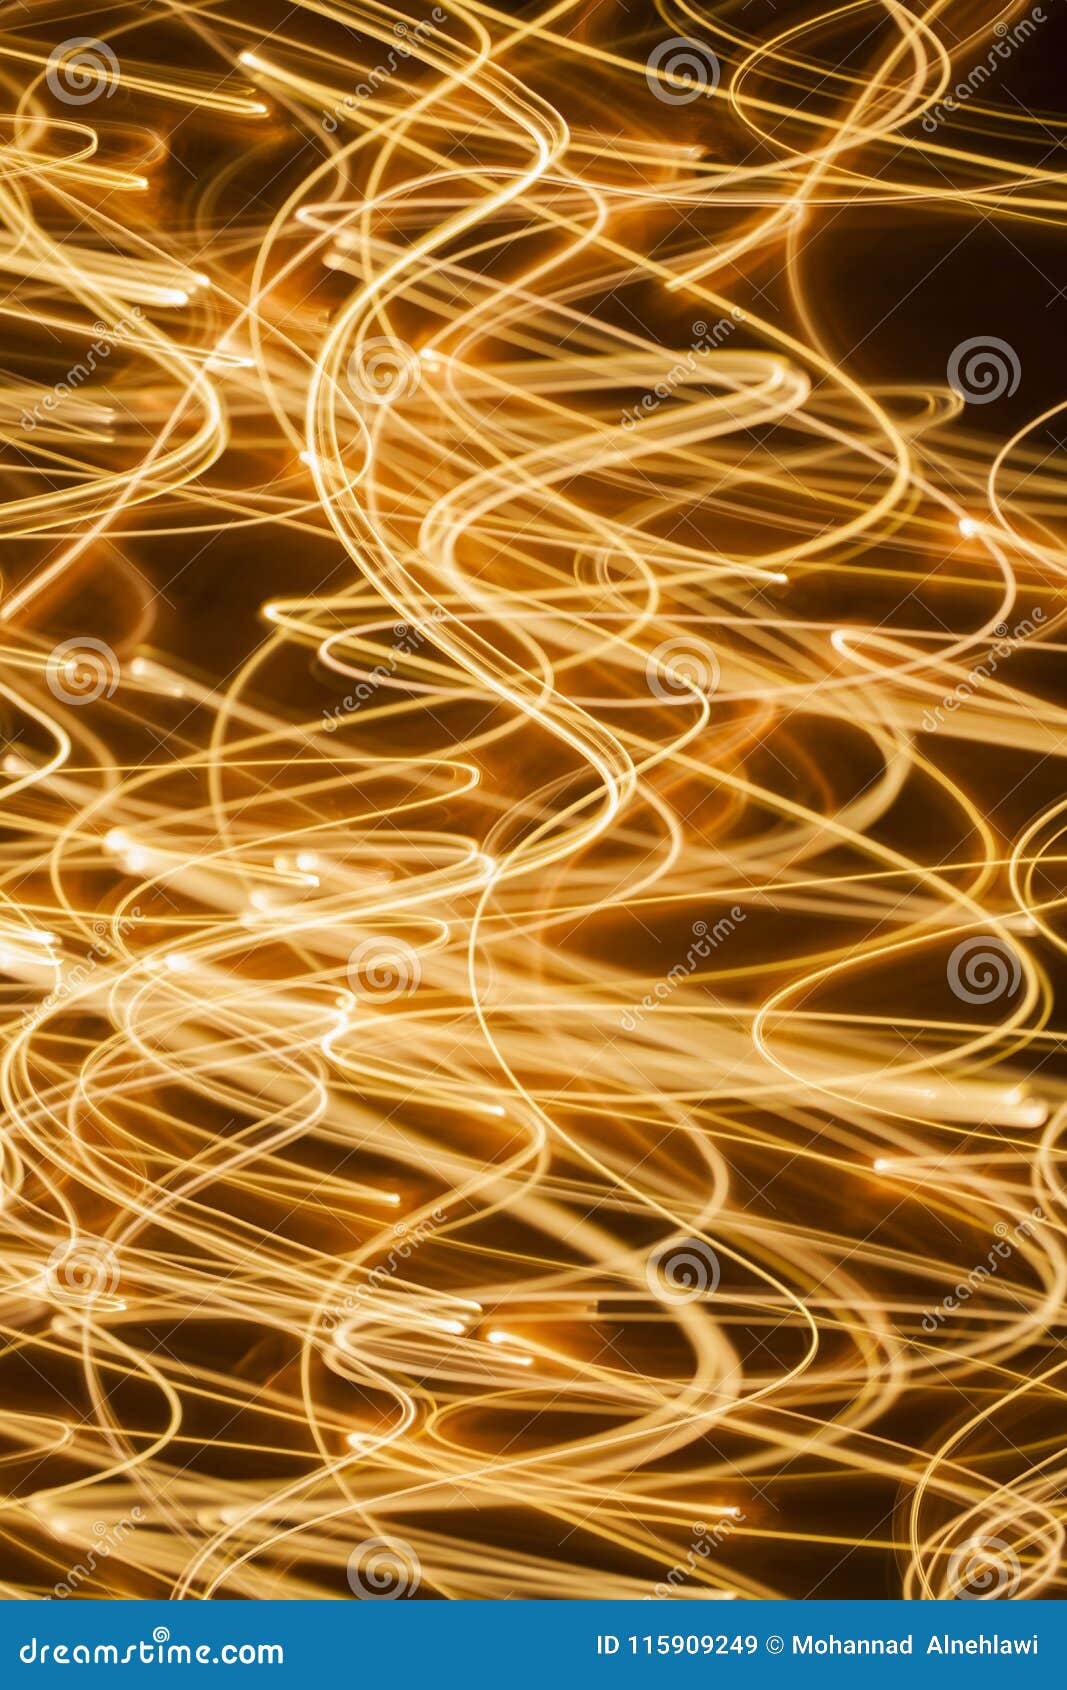 Swirl Sparkling Glowing Lines Background Stock Image - Image of ...